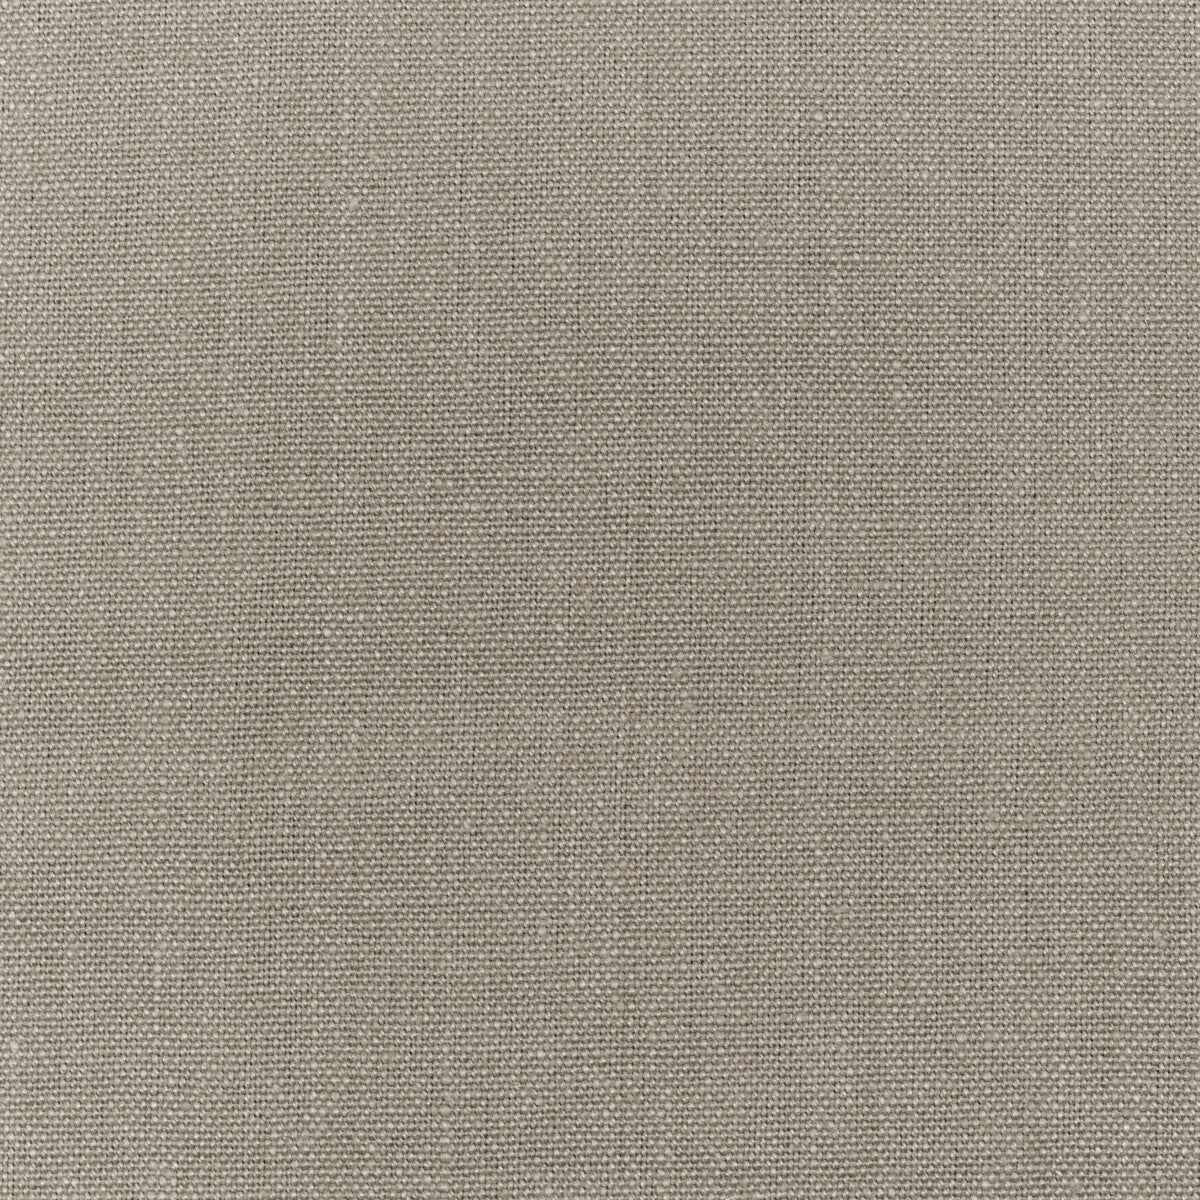 Knightsbridge fabric in smoke color - pattern PF50199.935.0 - by Baker Lifestyle in the Perfect Plains collection